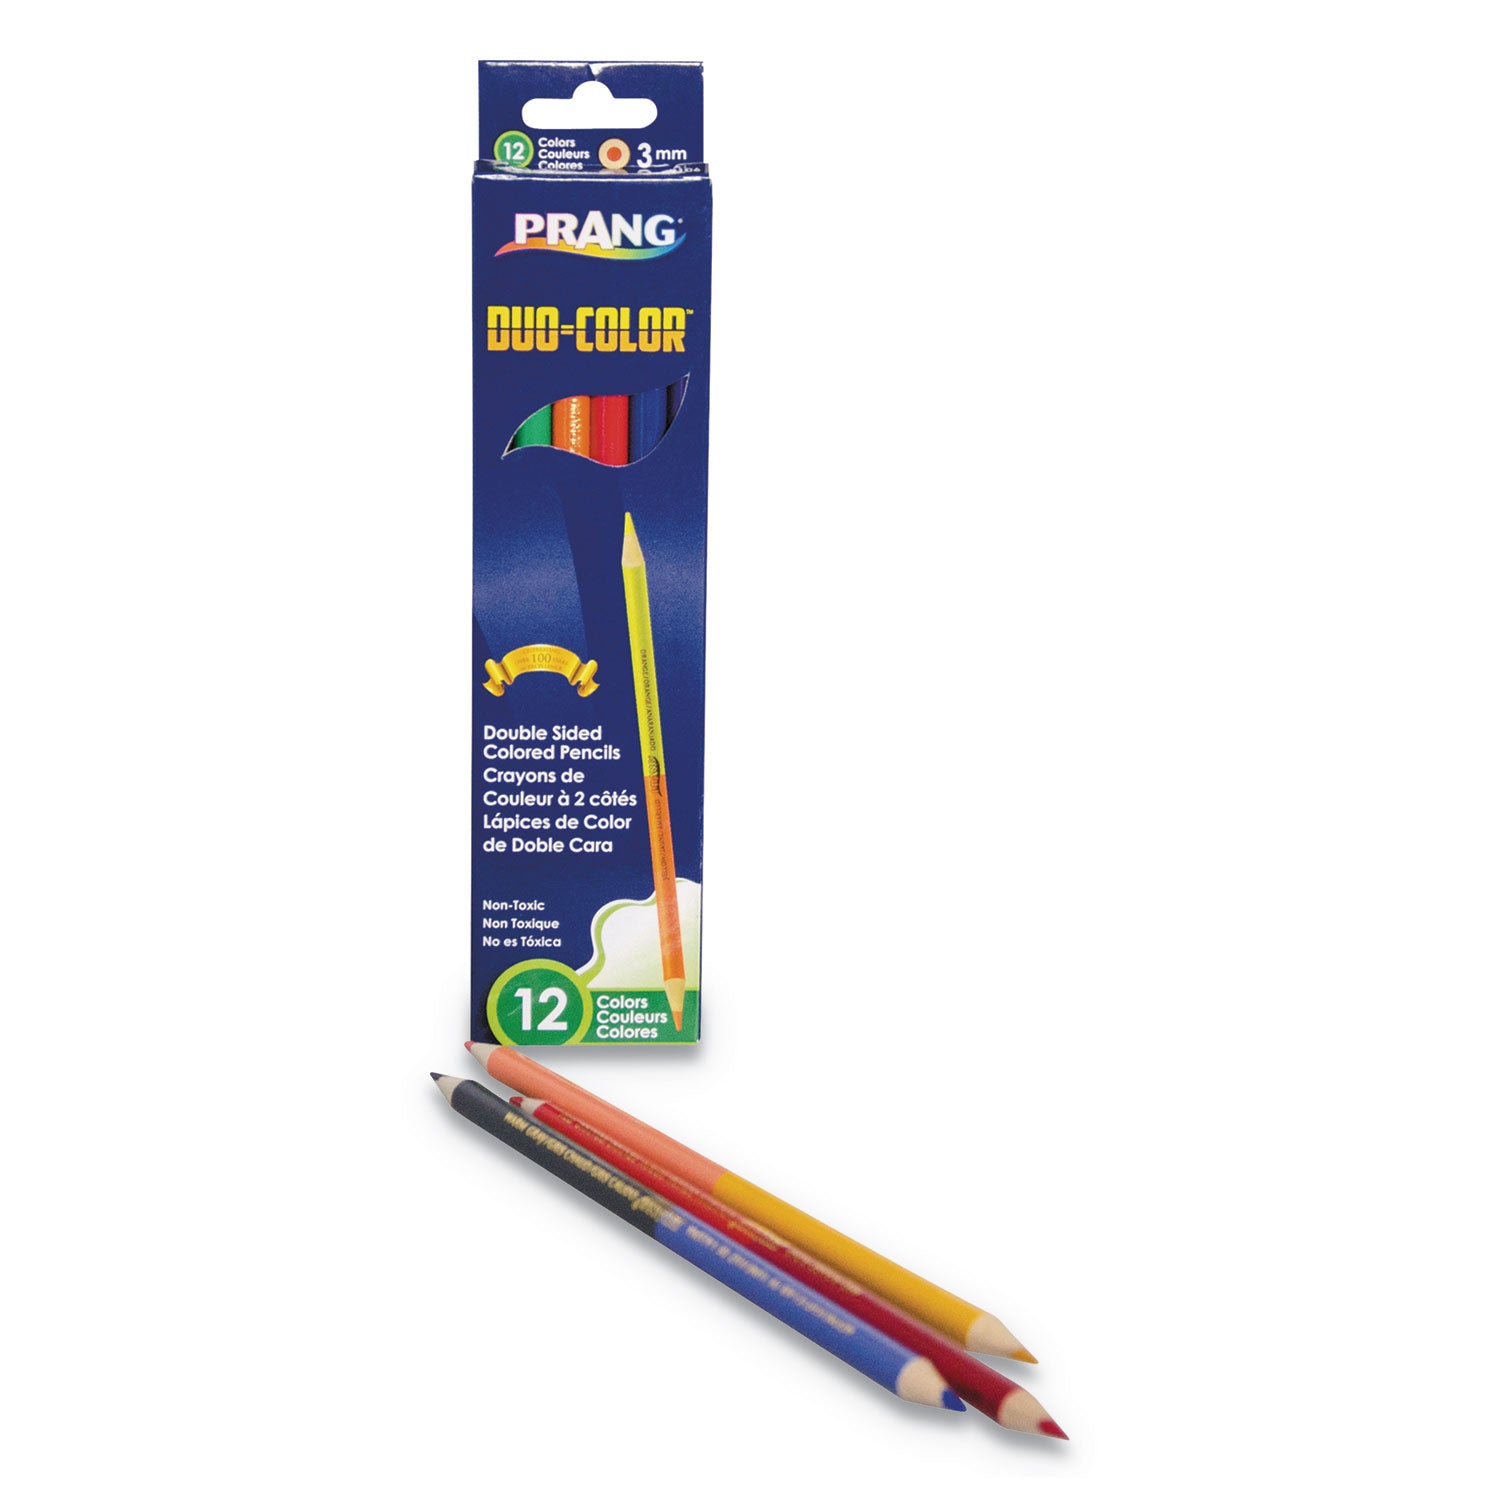 duo-color-colored-pencil-sets-3-mm-assorted-lead-and-barrel-colors-6-pack_dix22106 - 2